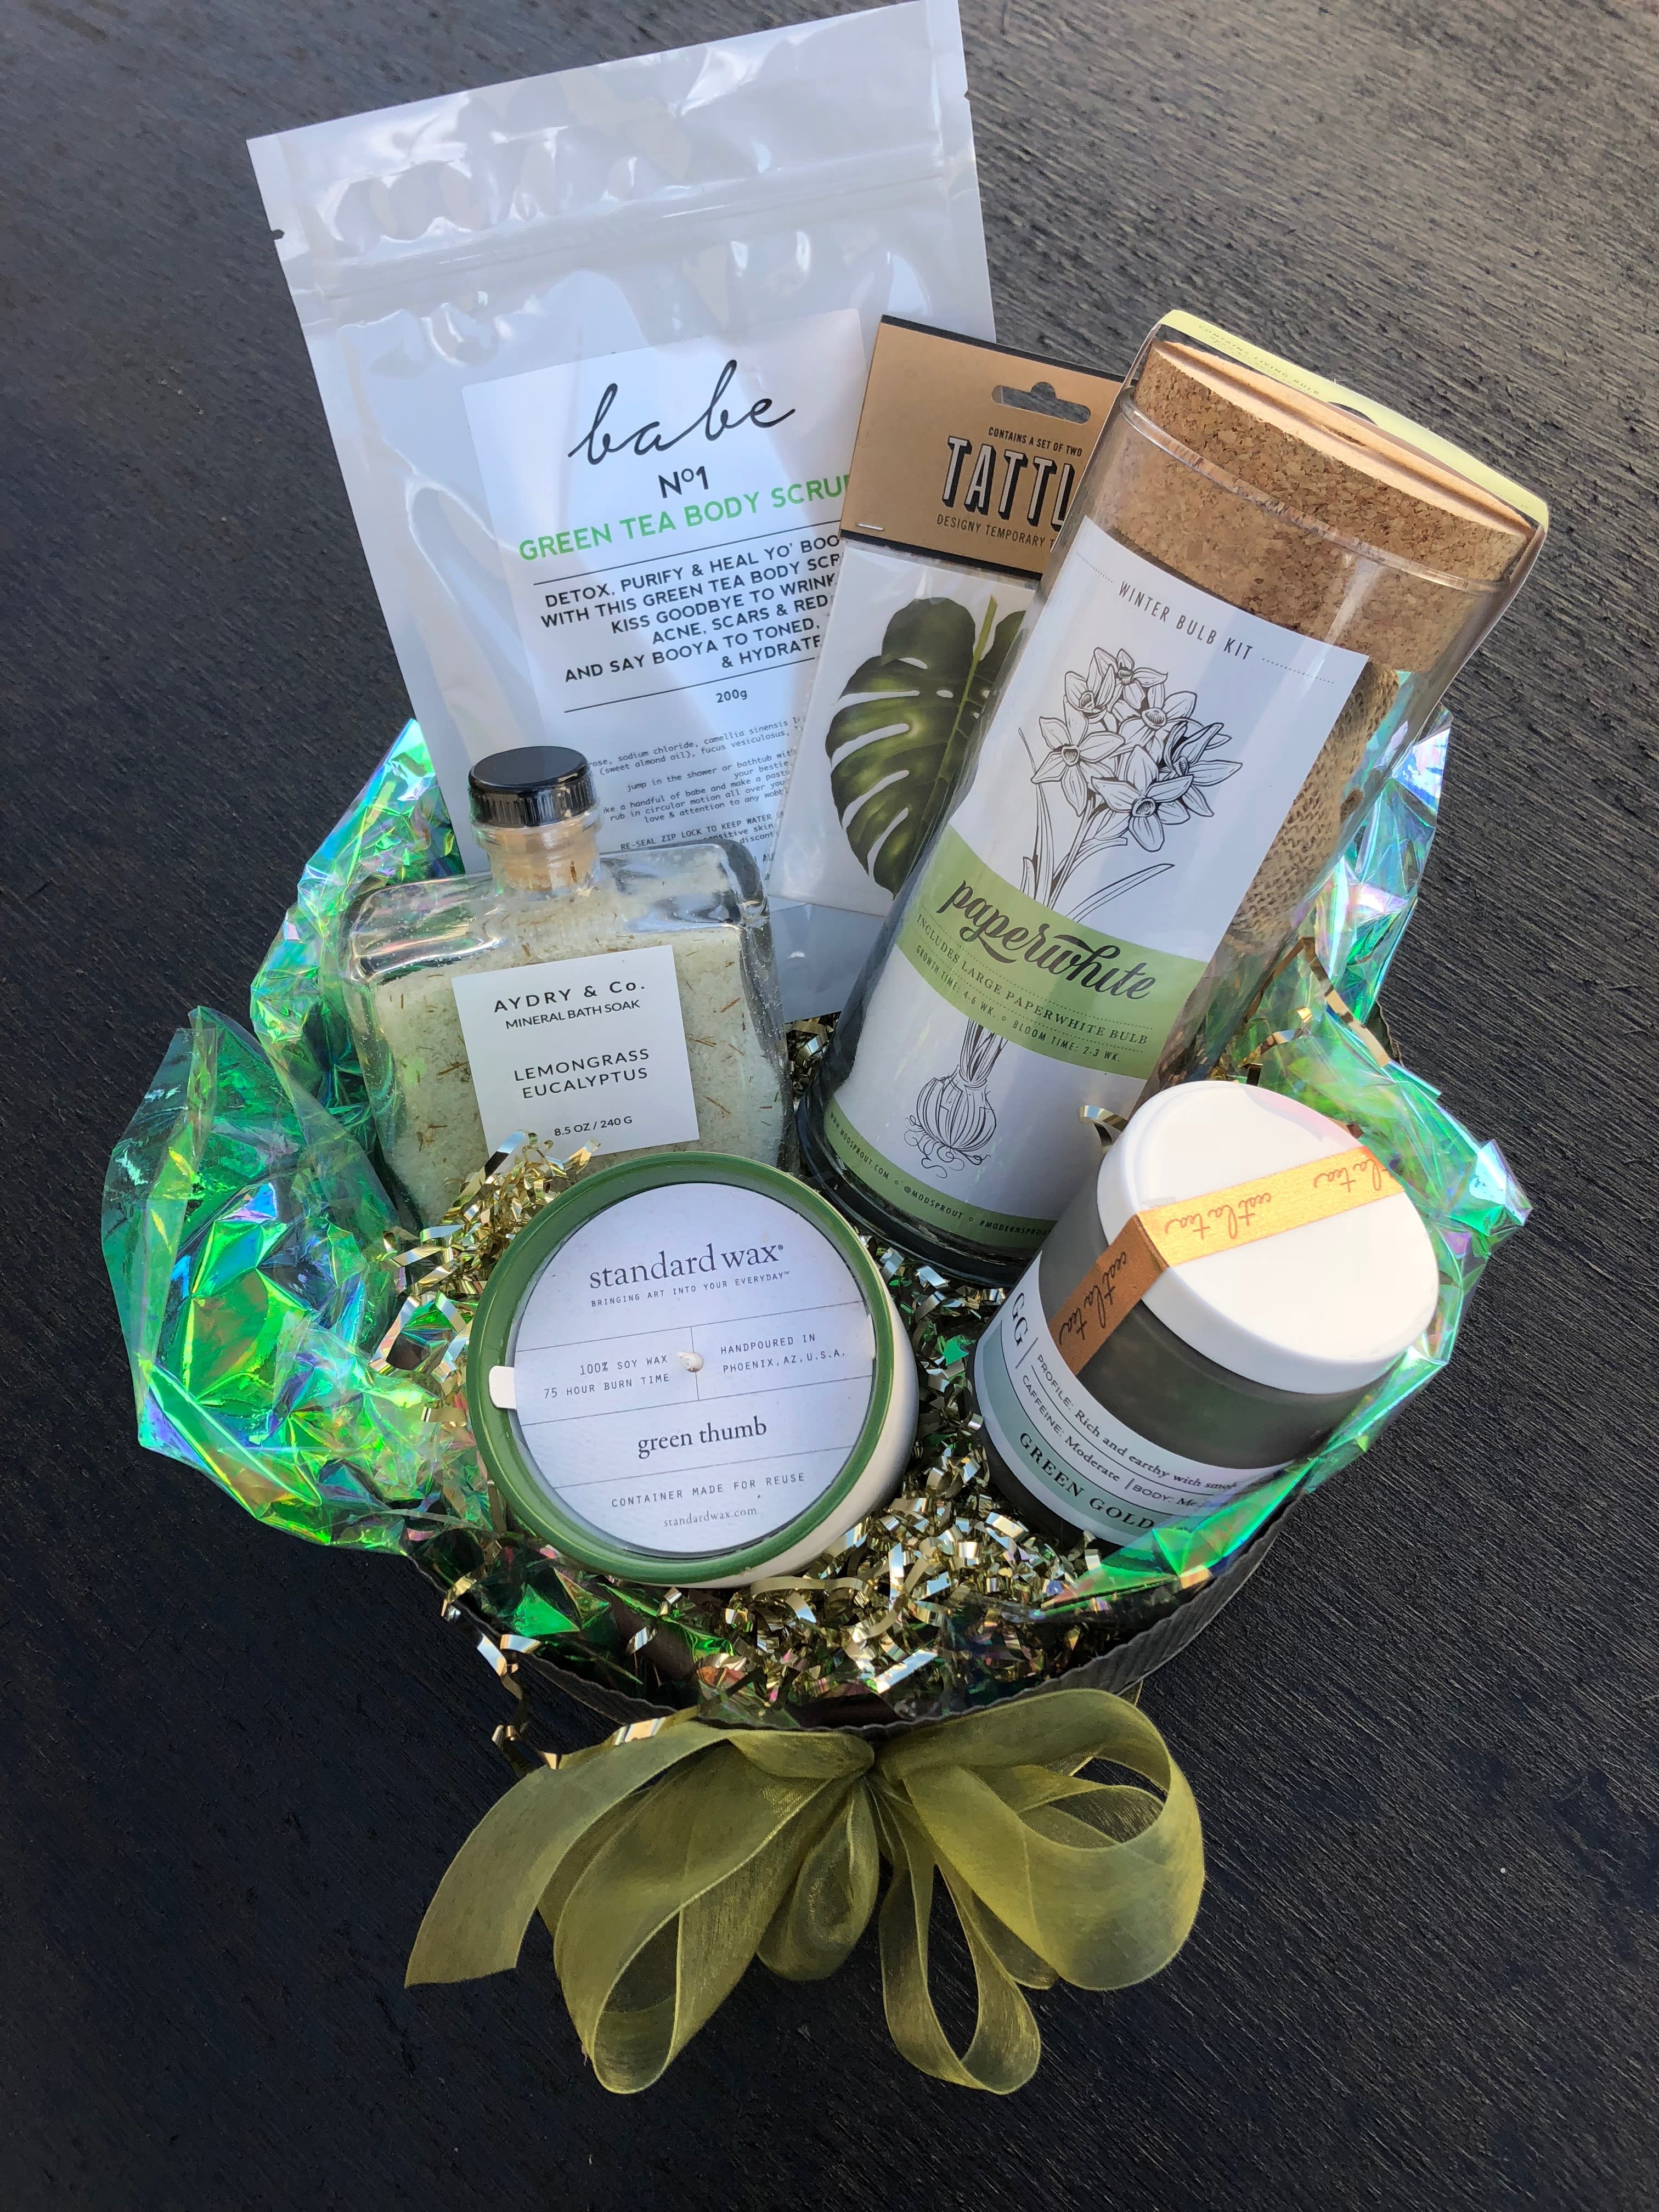 &quot;Green Thumb&quot; Gift Basket - A fresh and rejuvenating gift basket, perfect for that special someone who likes to go green!  This basket includes: Green Tea body scrub by Babe, Paperwhite Winter bulb kit by Modern Sprout, Lemongrass and Eucalyptus bath soak by Aydry &amp; Co., Green Thumb soy candle by Standard Wax, Green Gold loose leaf tea by Teaspressa, and a monstera leaf temporary tattoo. 